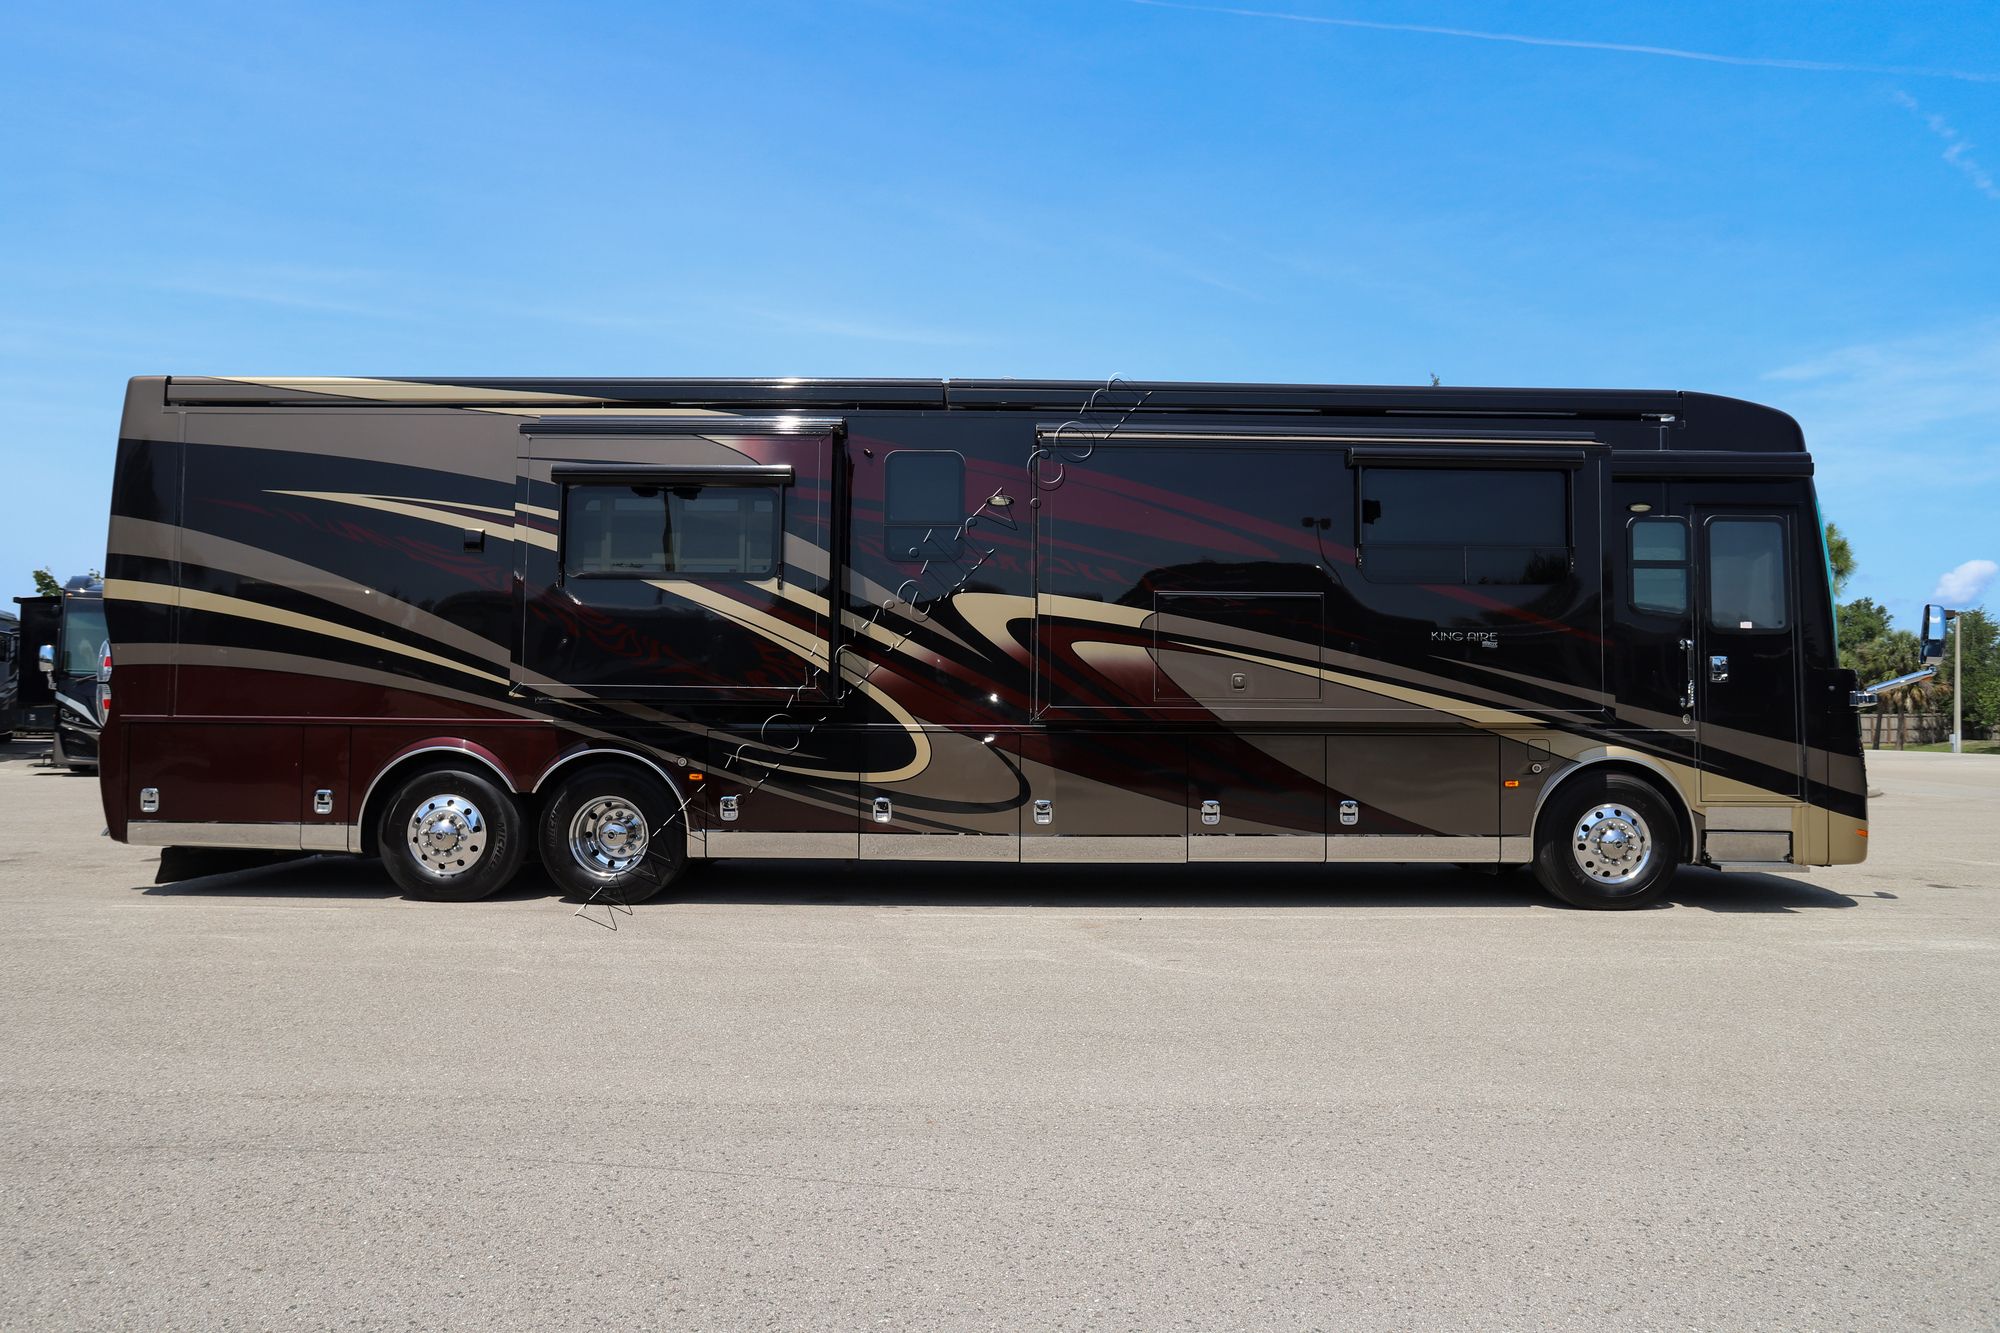 Used 2016 Newmar King Aire 4519 Class A  For Sale